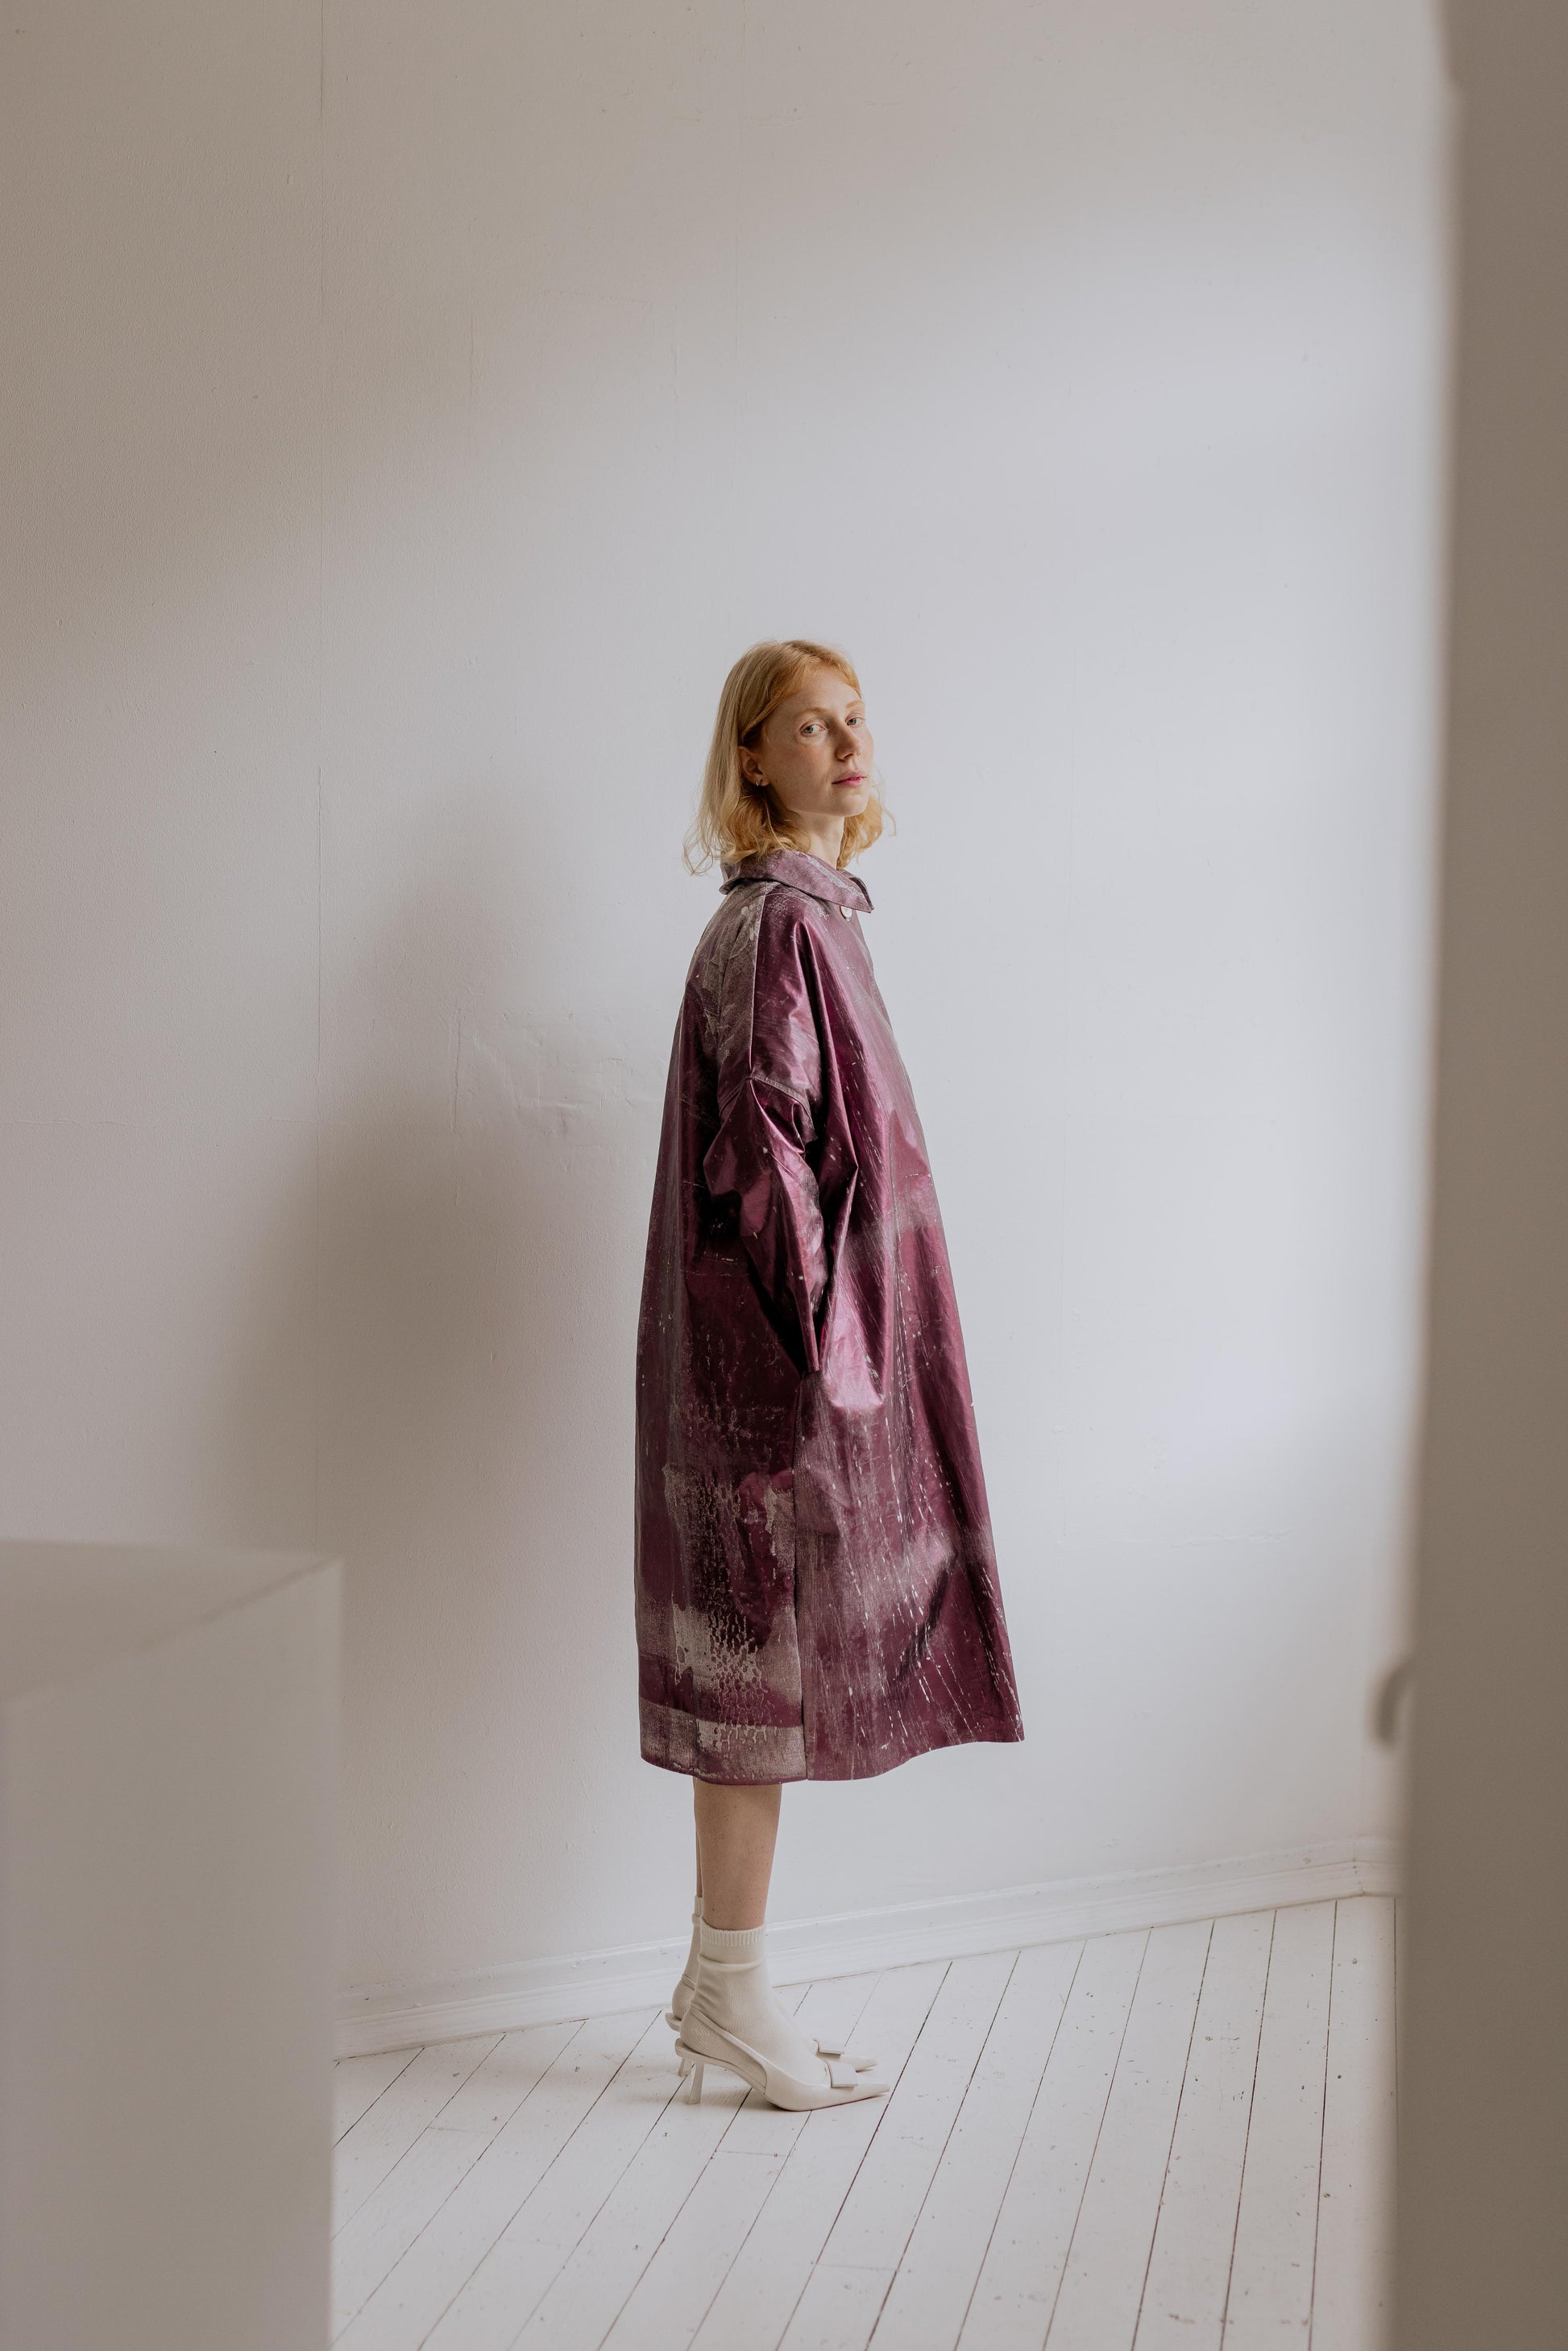 THE LUNA COAT | We are so excited to introduce our new metallic beetled linen - The Luna Coat. Cut in the same sillouhette as our much loved 'Find The Gold' Coat, The Luna has the same effortless, 'throw-on' feel to it, while remaining a stand-out, statem